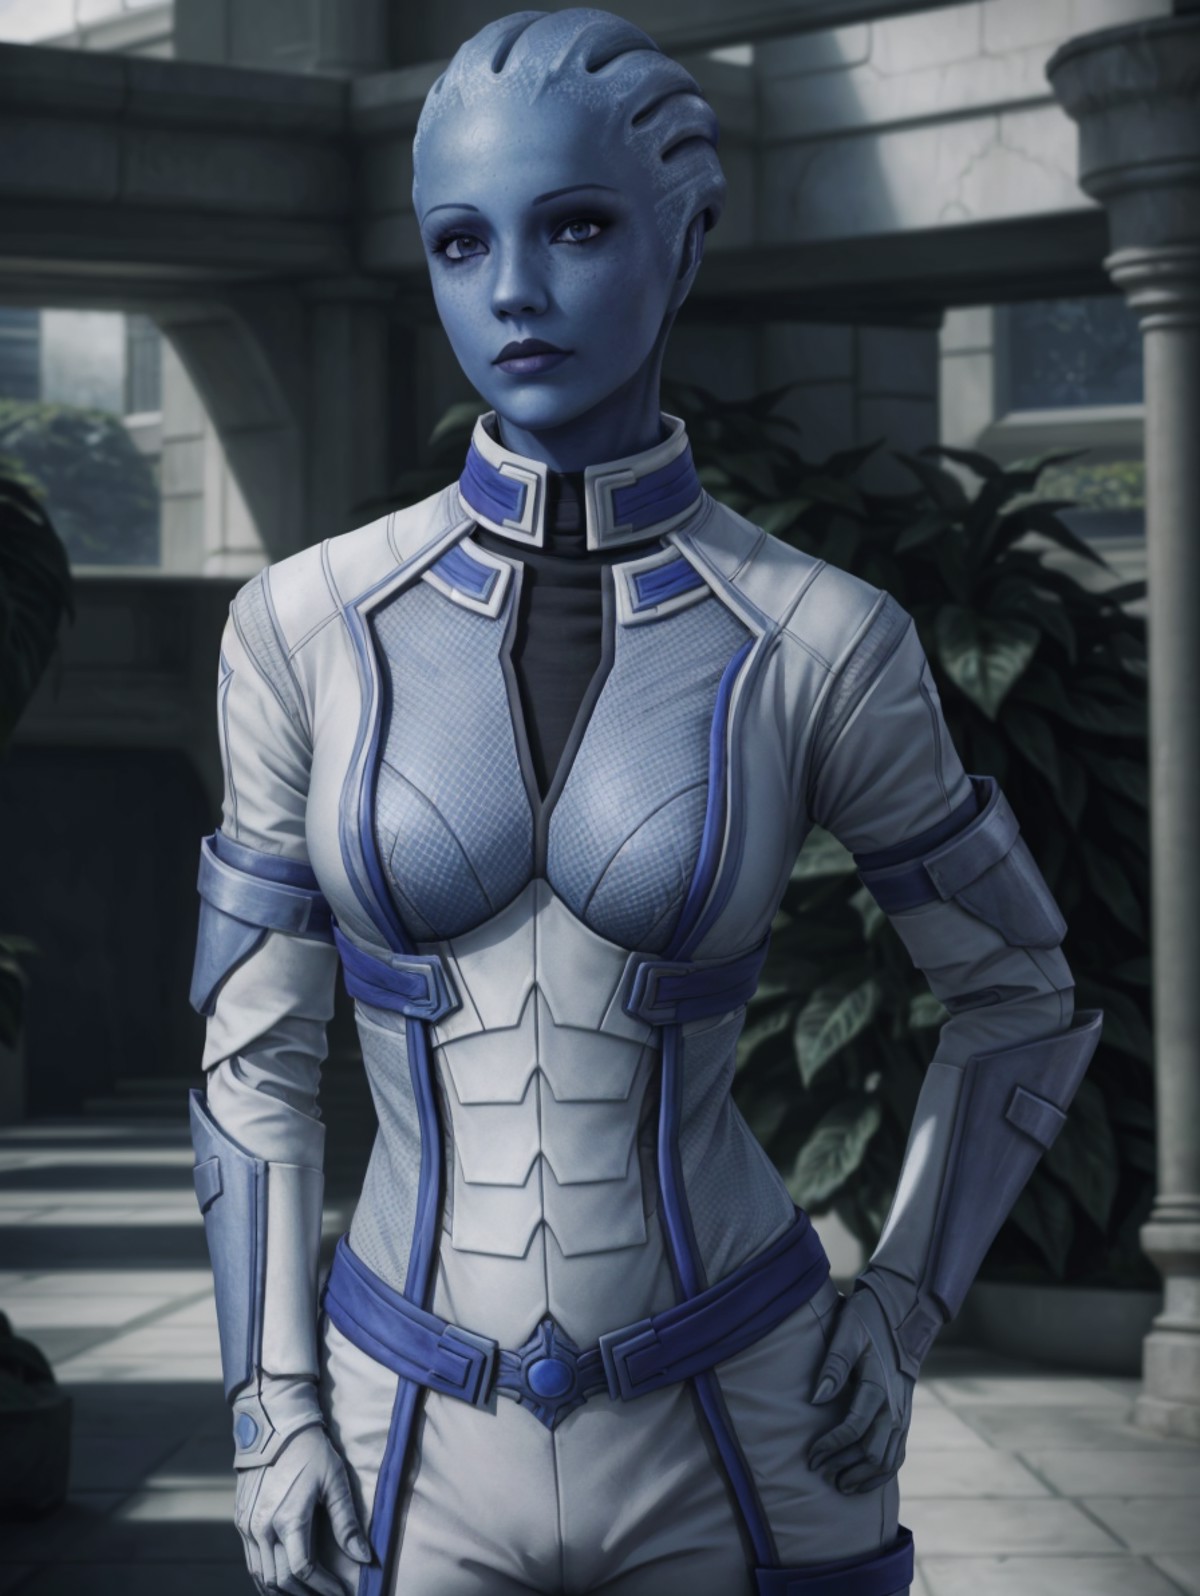 masseffectliara posing holding her hip with her hands in a atrium with plants in the background, blue skinned woman, cute ...